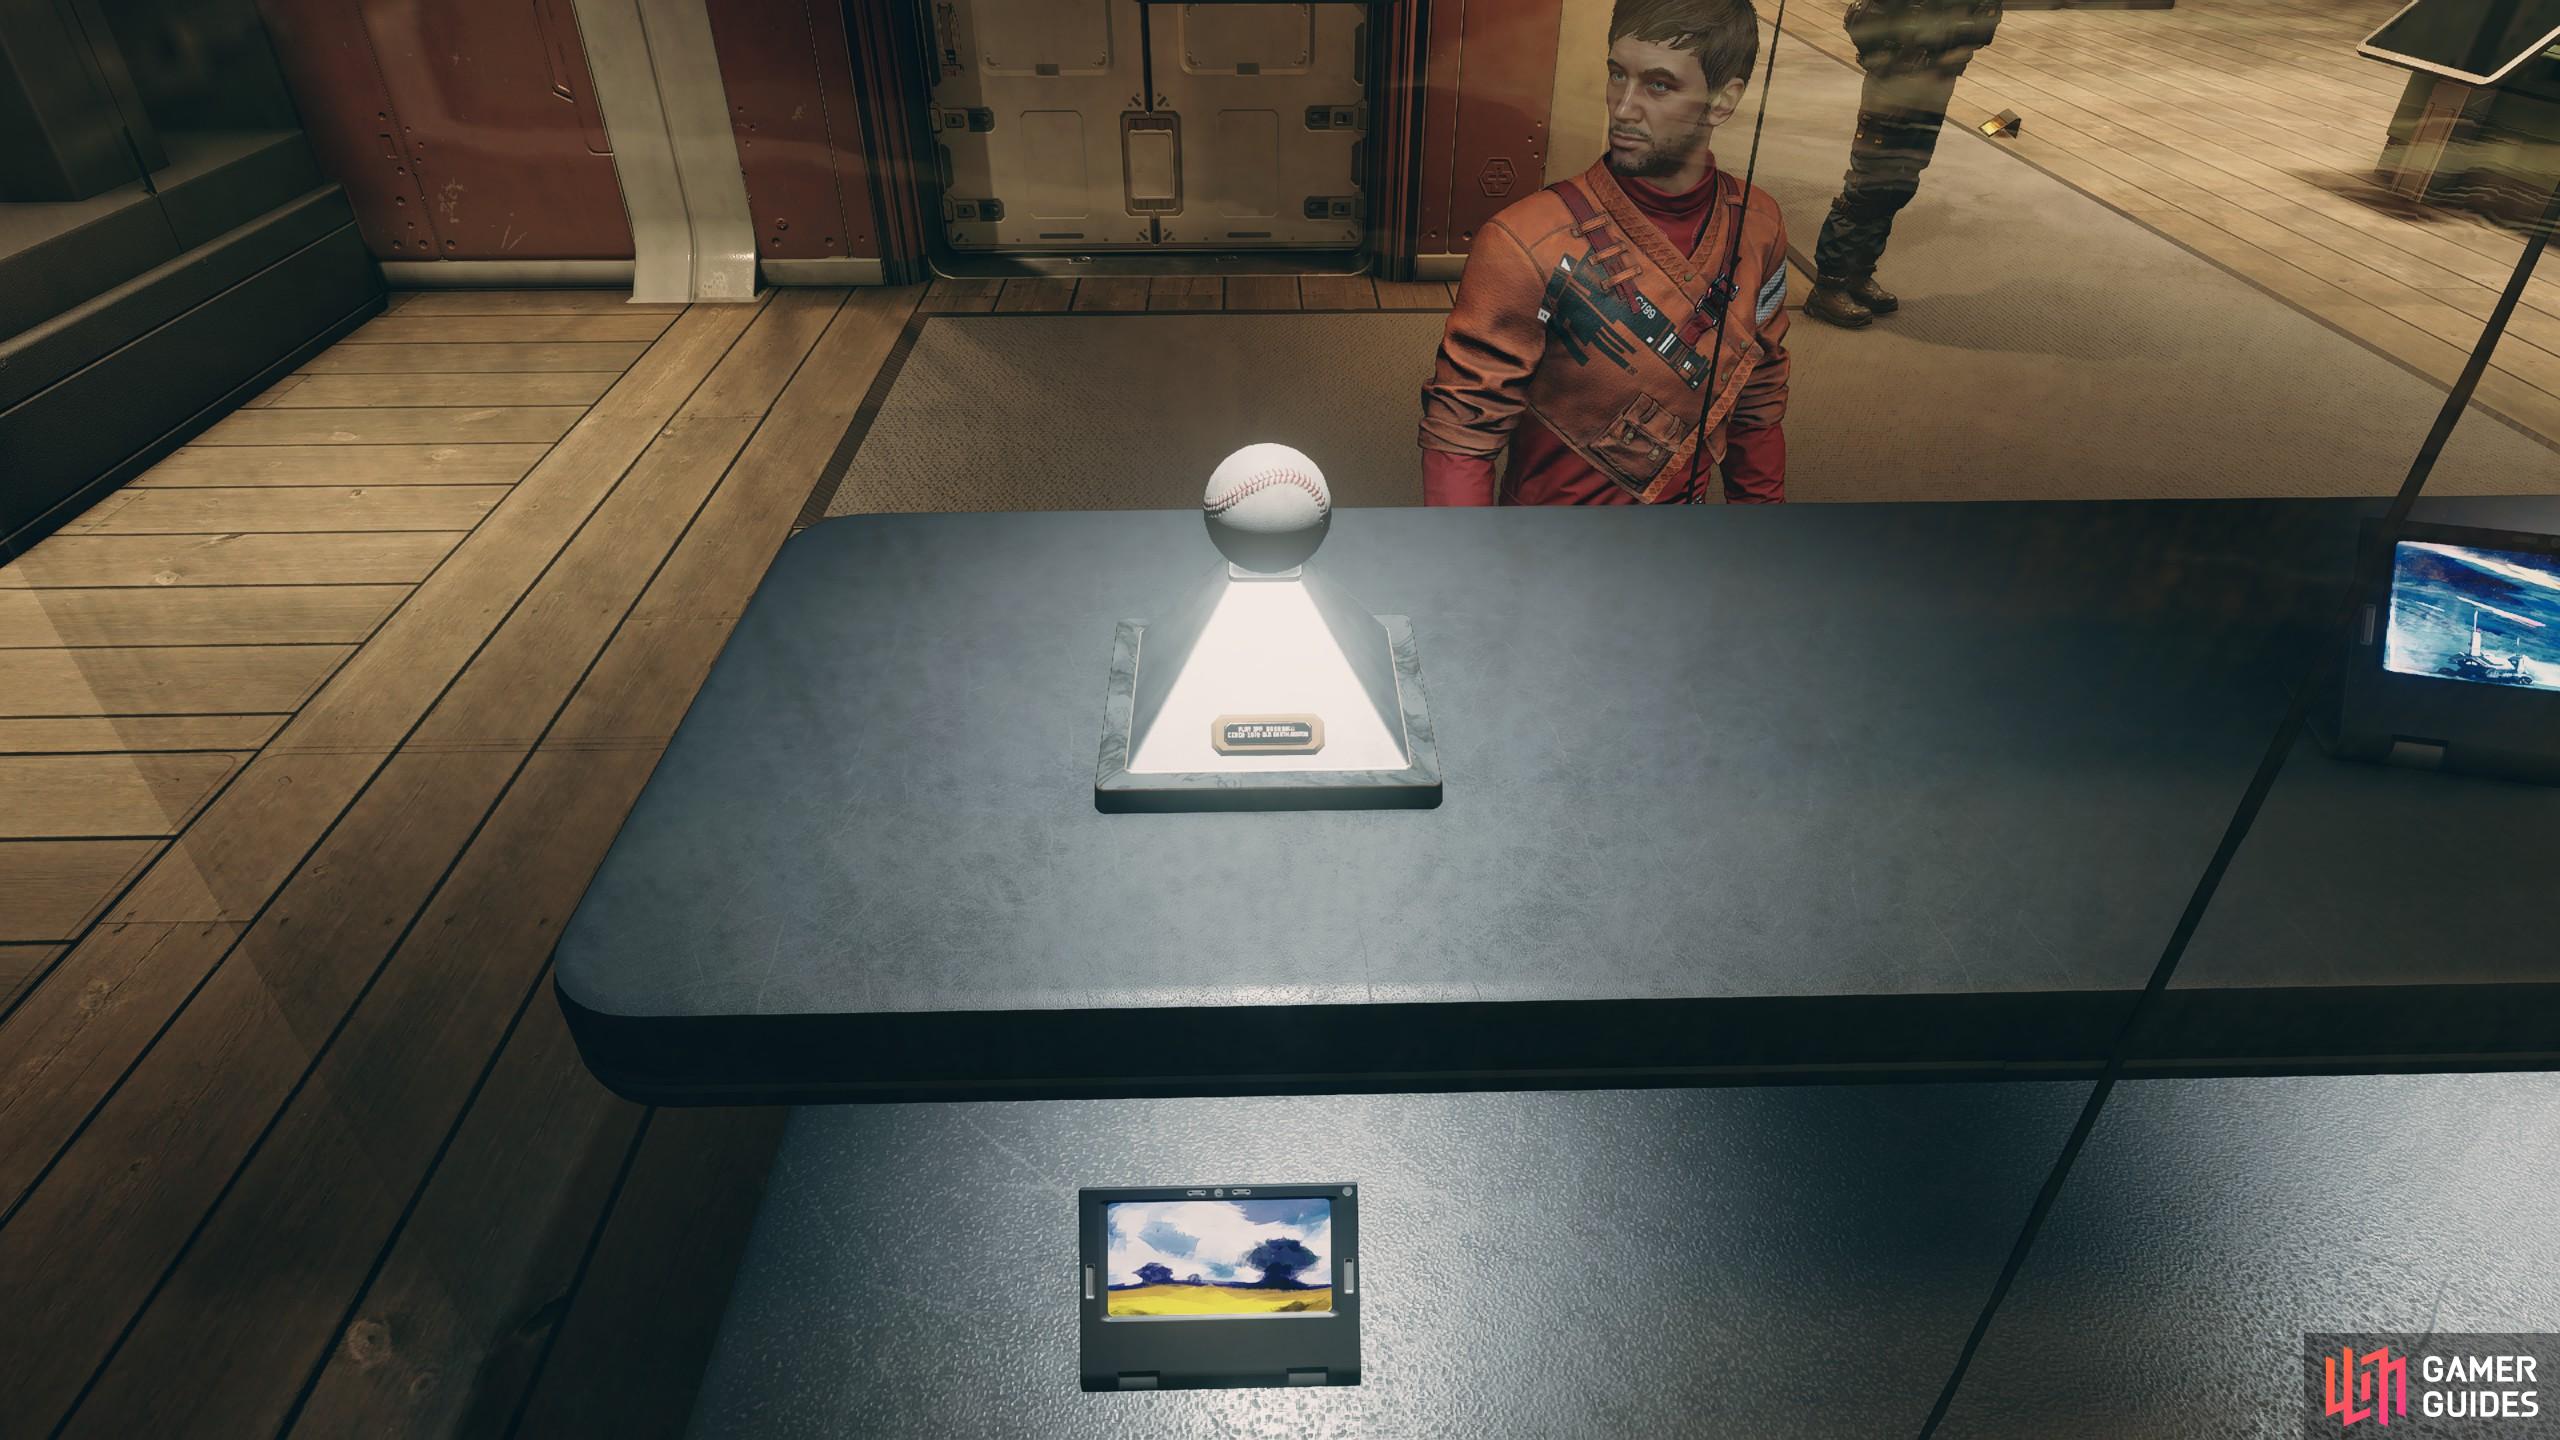 There's a Fallout 4 easter egg in Starfield found in the museum on Titan.